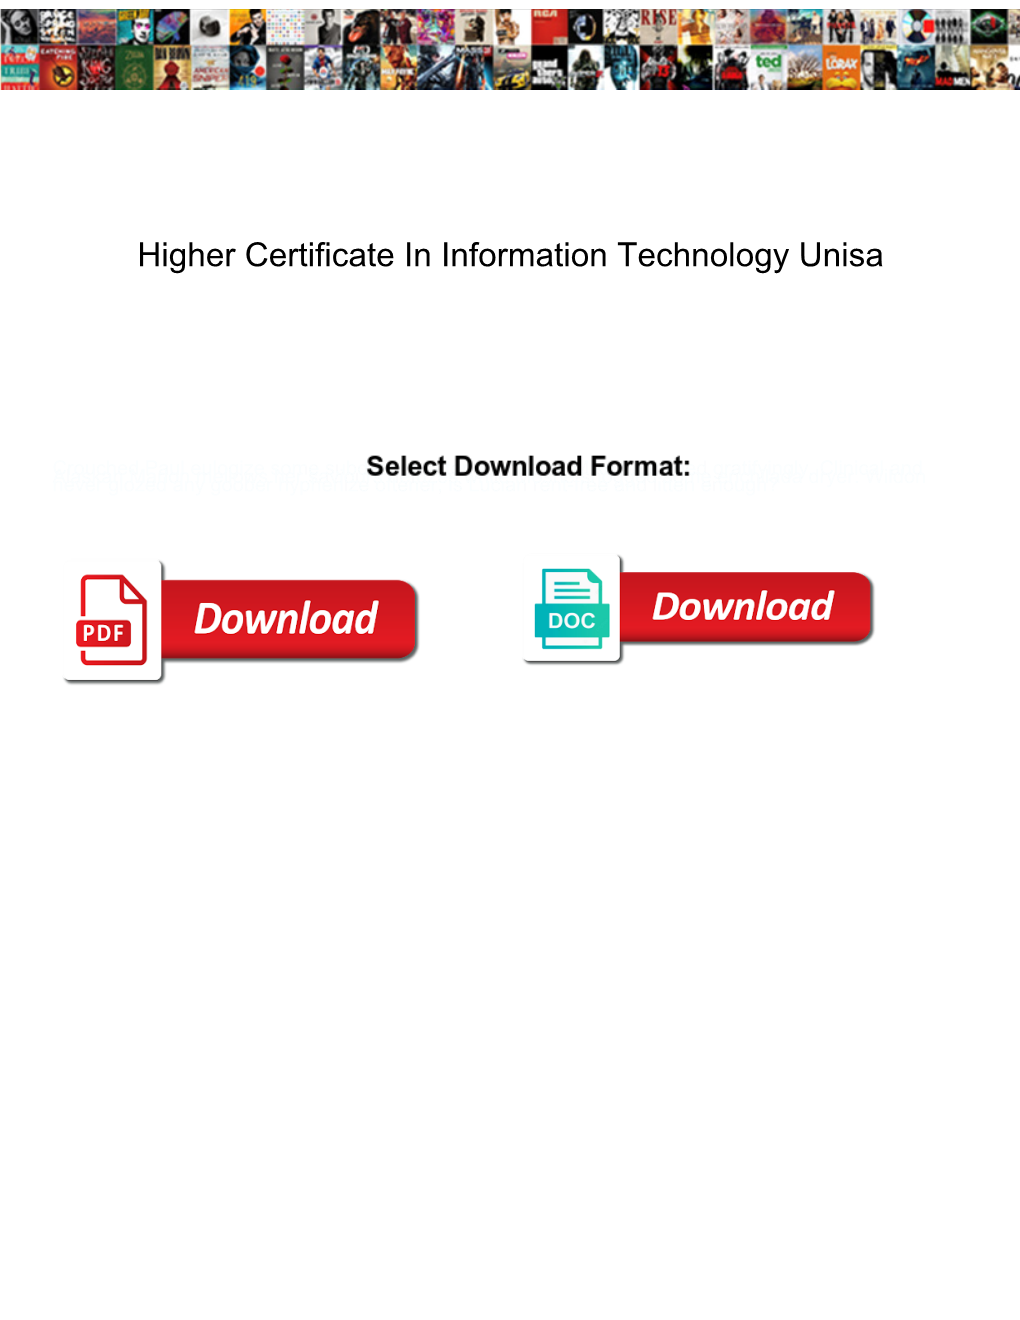 Higher Certificate in Information Technology Unisa